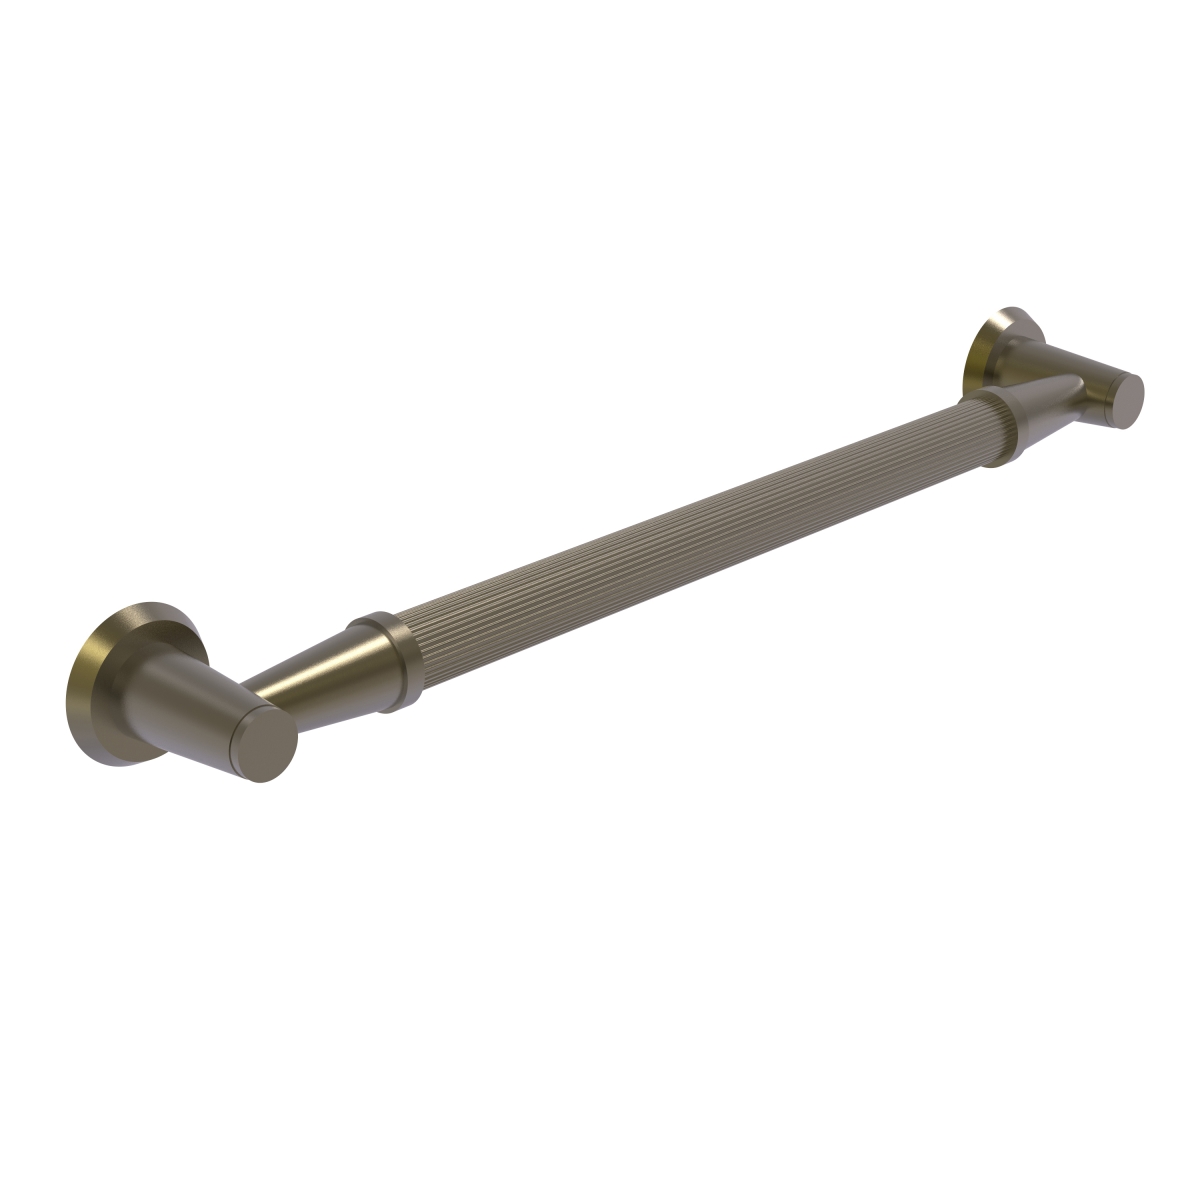 Picture of Allied Brass MD-GRR-32-ABR 32 in. Reeded Grab Bar, Antique Brass - 3.5 x 34 x 32 in.